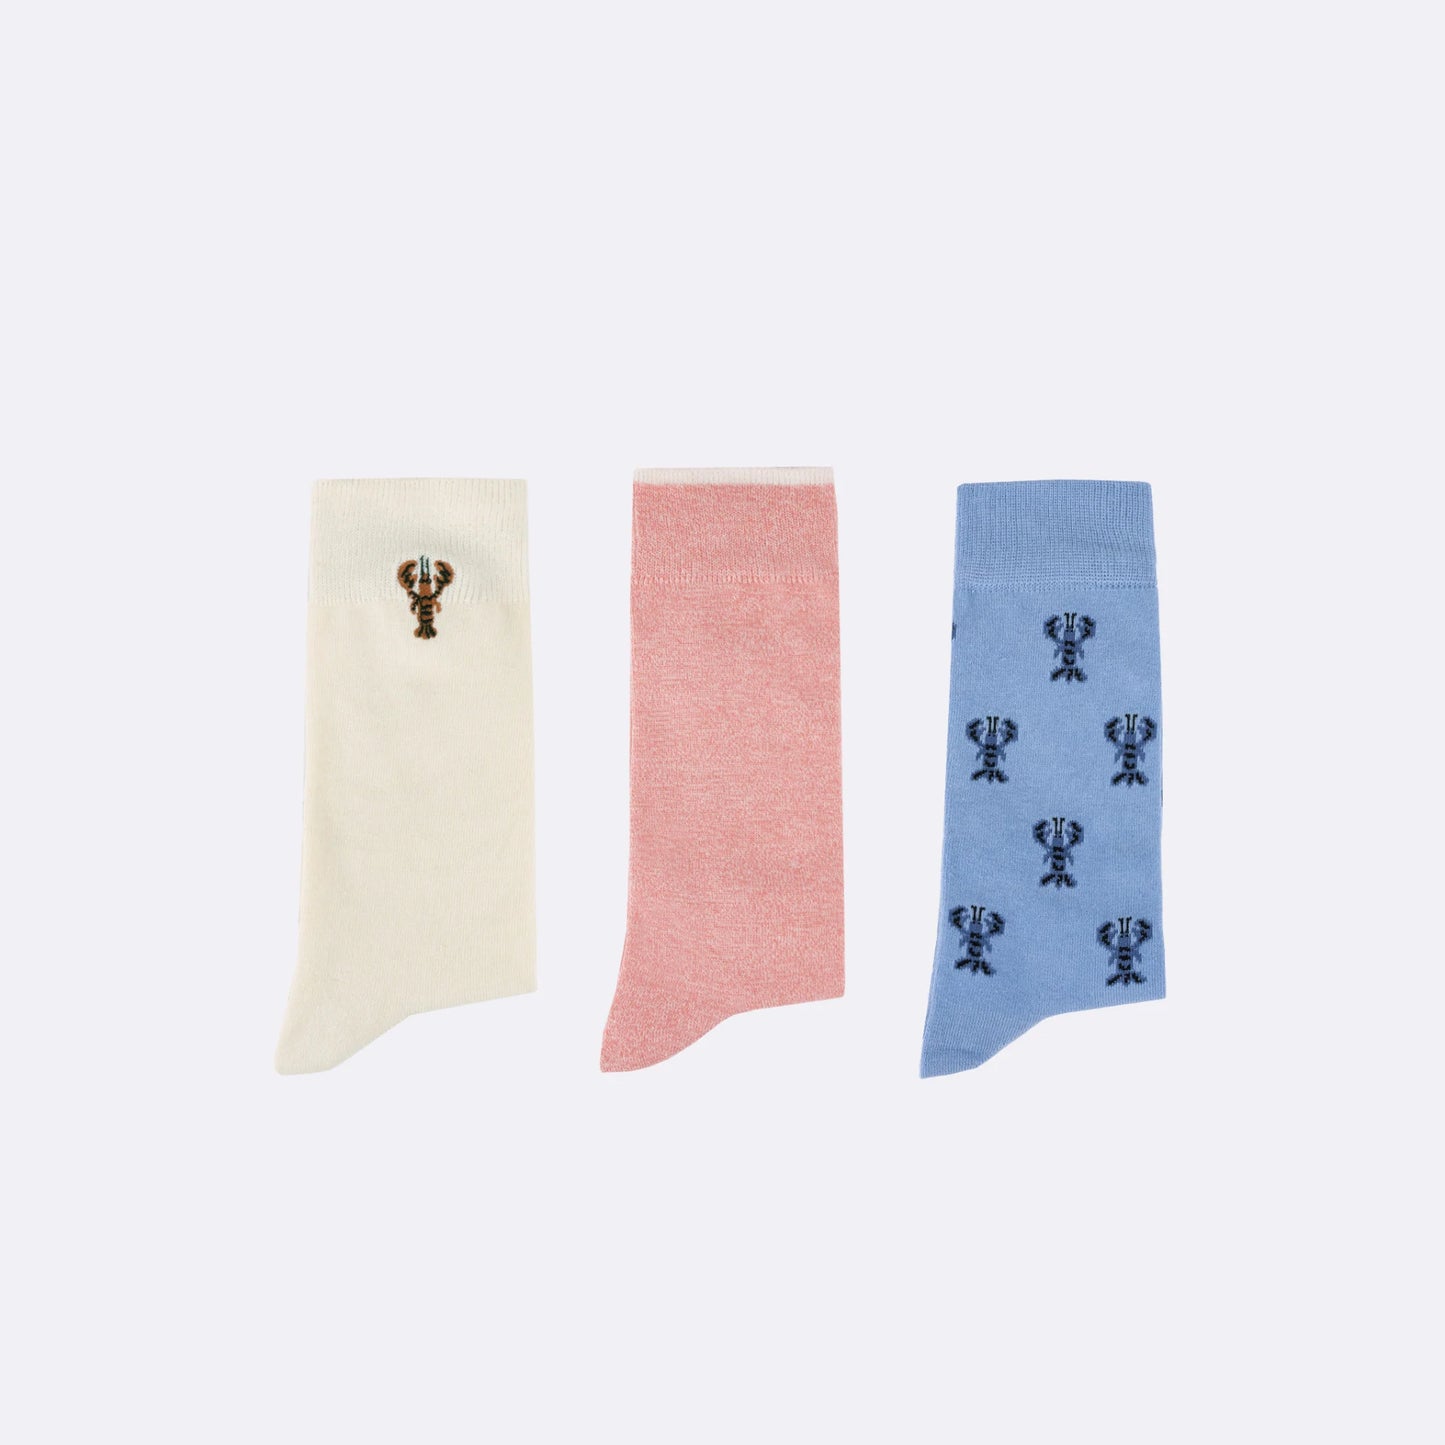 Chaussettes Socks x3 Lobster - Coton et Polyester